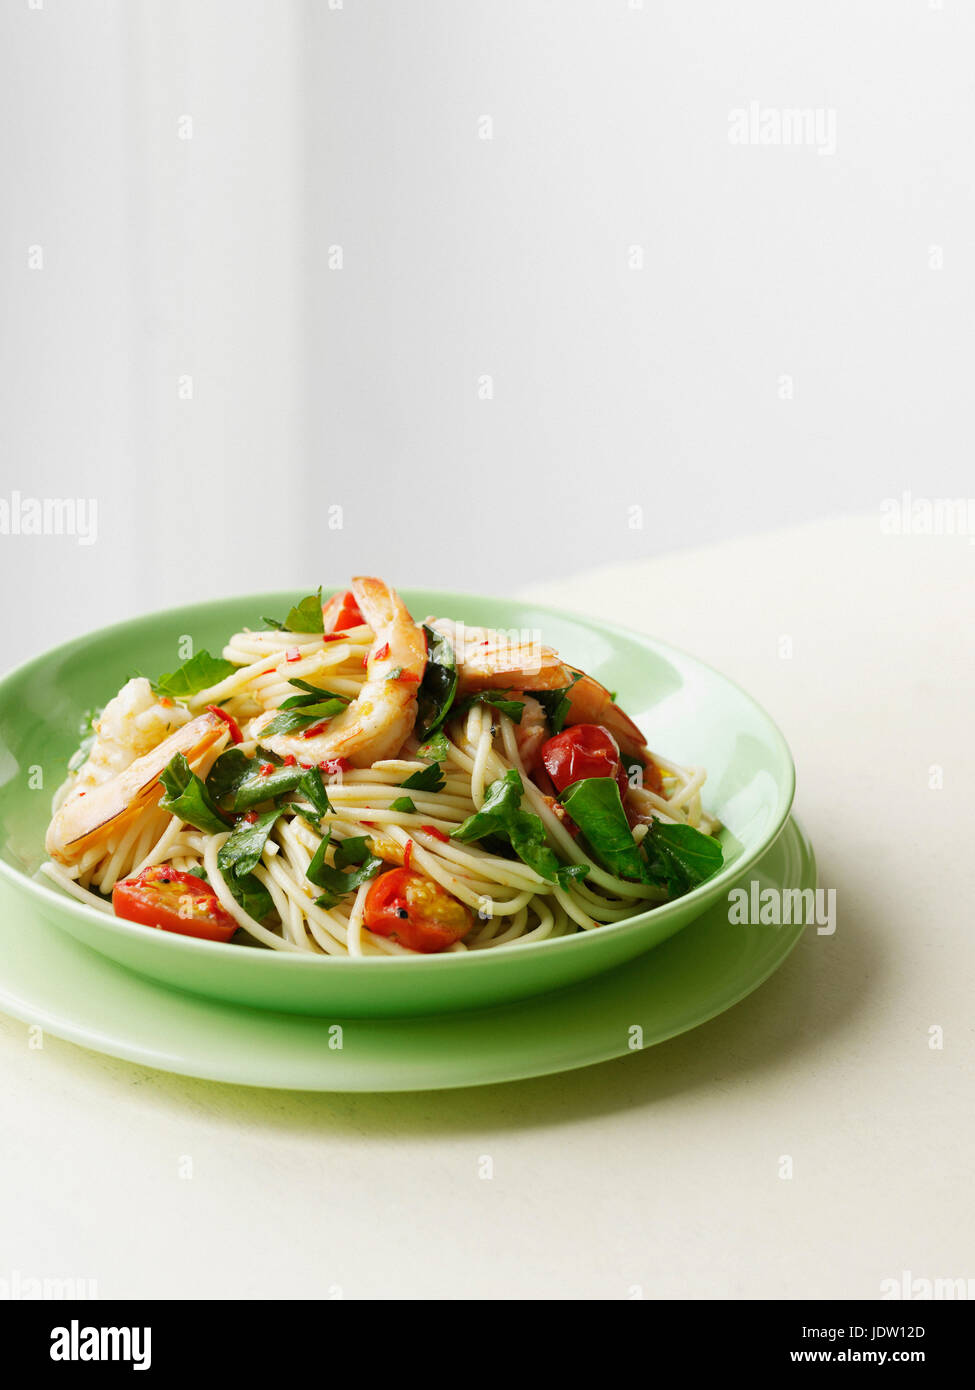 Plate of prawns and pasta Stock Photo